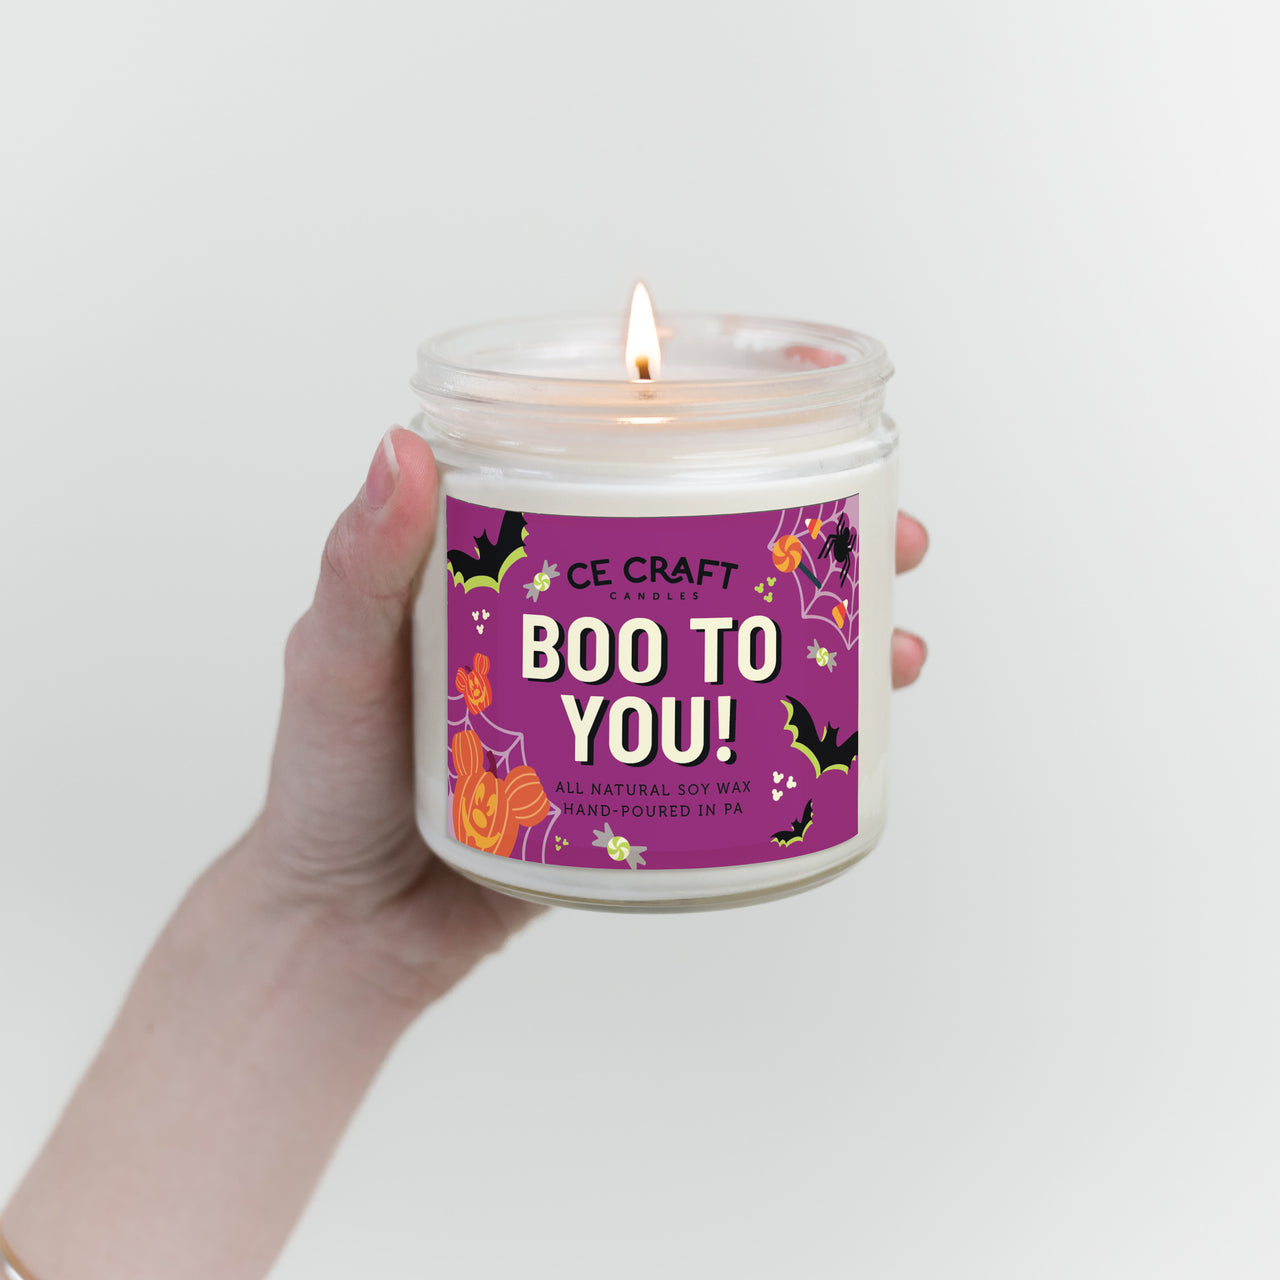 BOO to You 16 oz. Candle